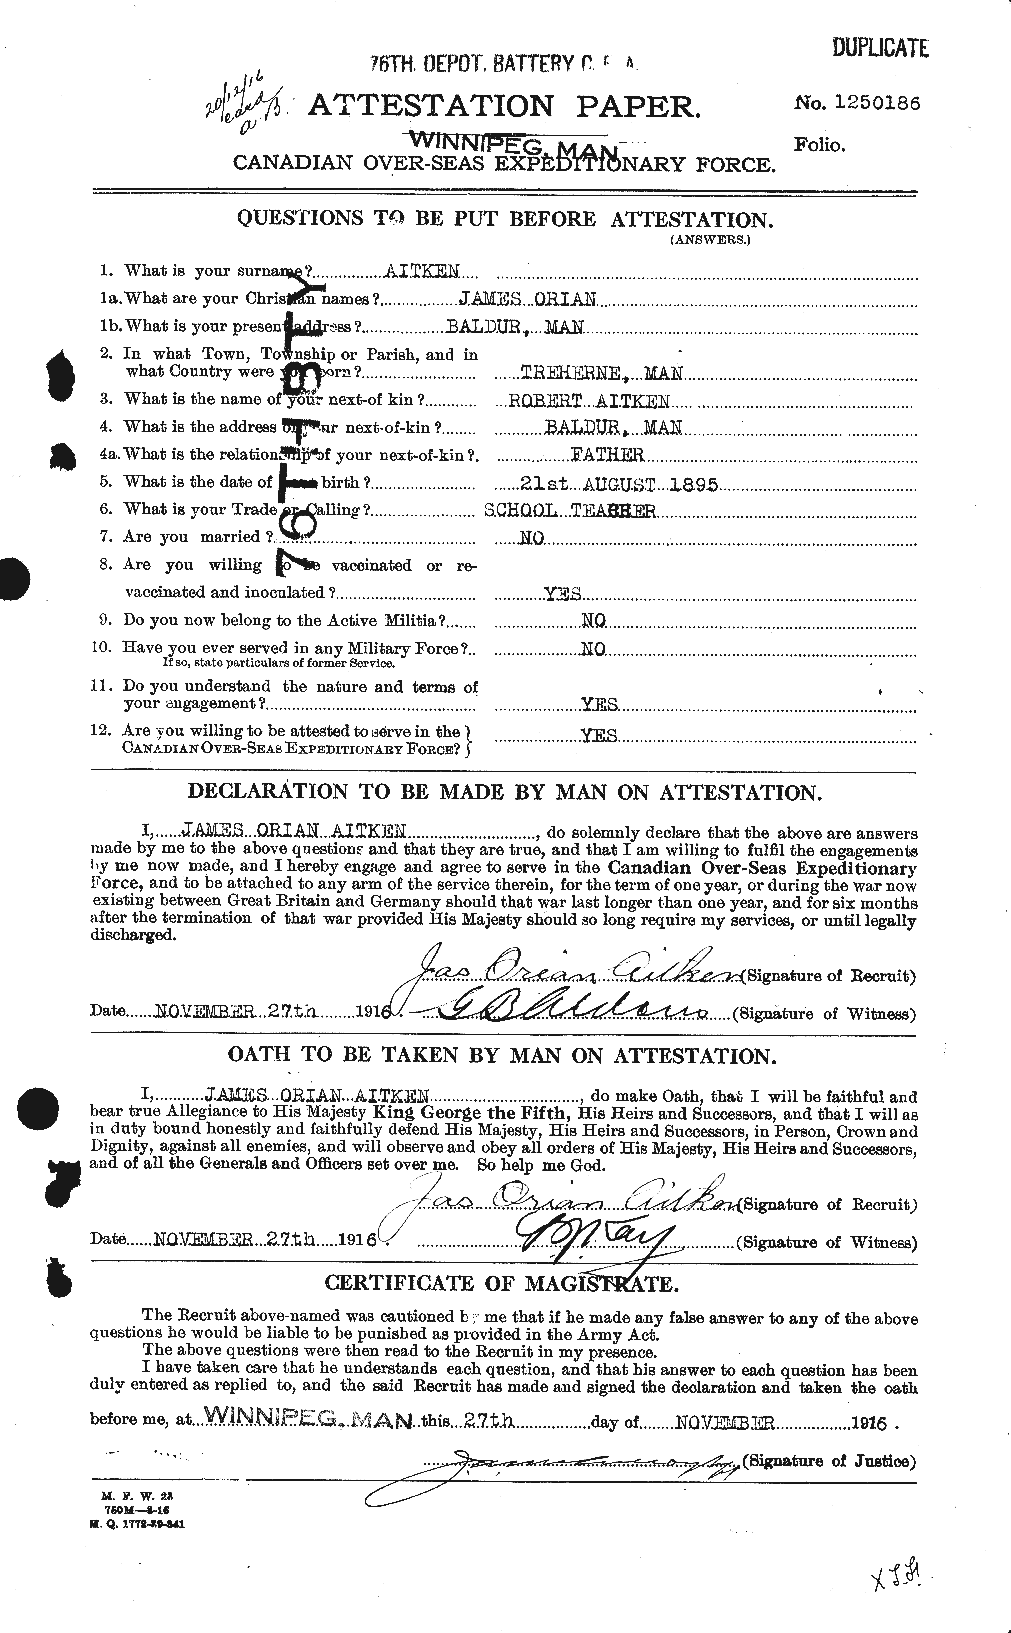 Personnel Records of the First World War - CEF 203389a